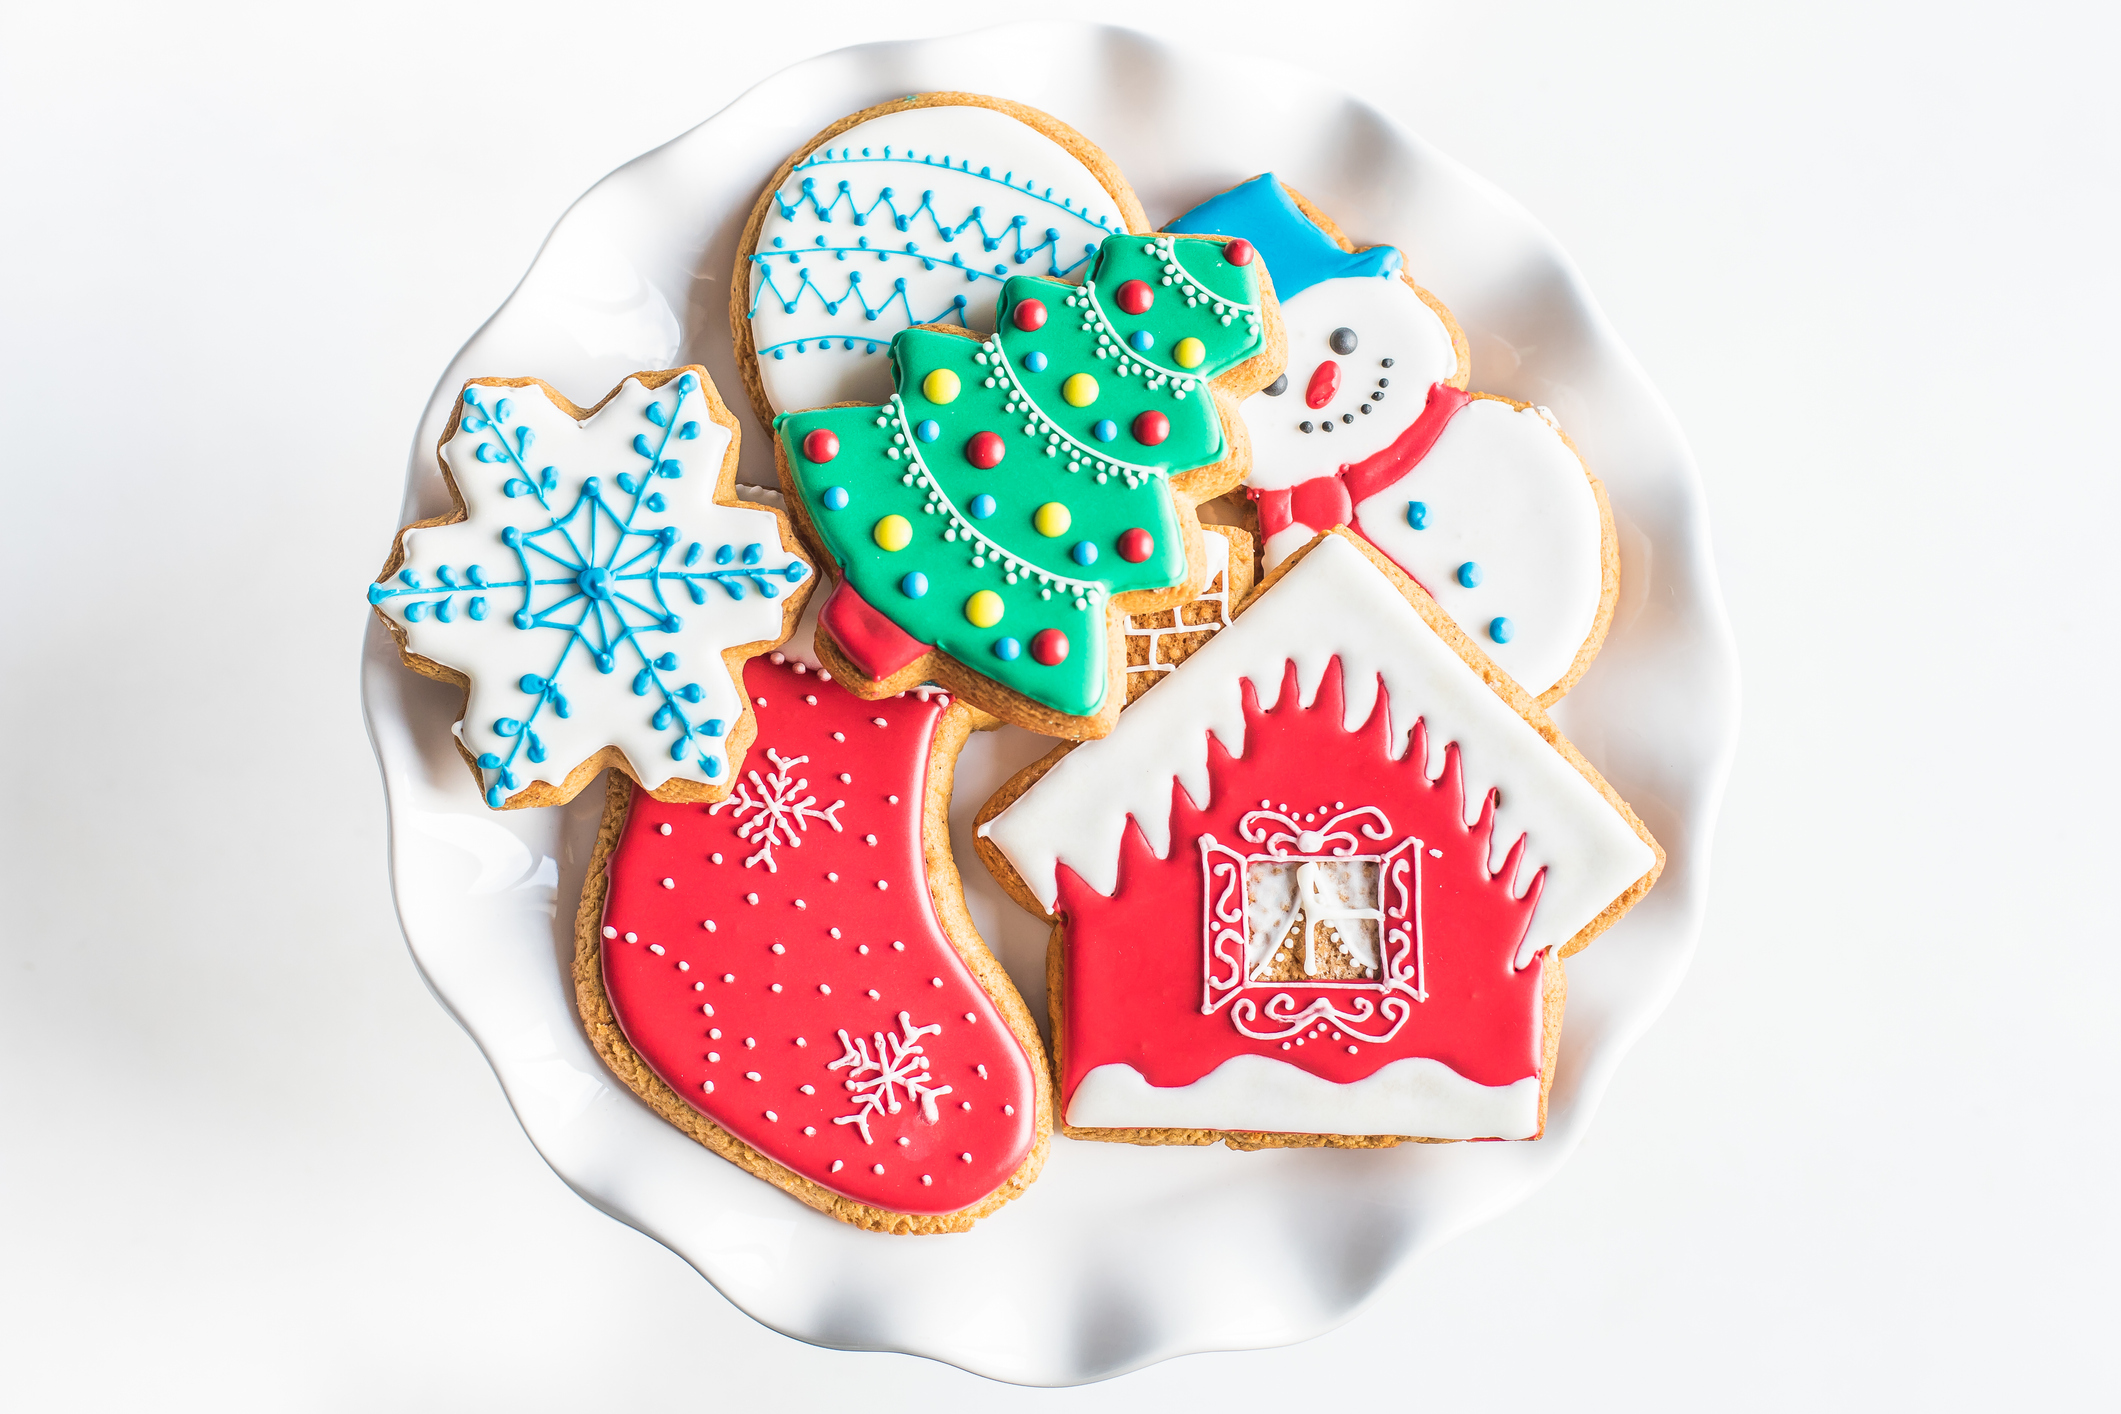 6. Frosted Sugar Cookies